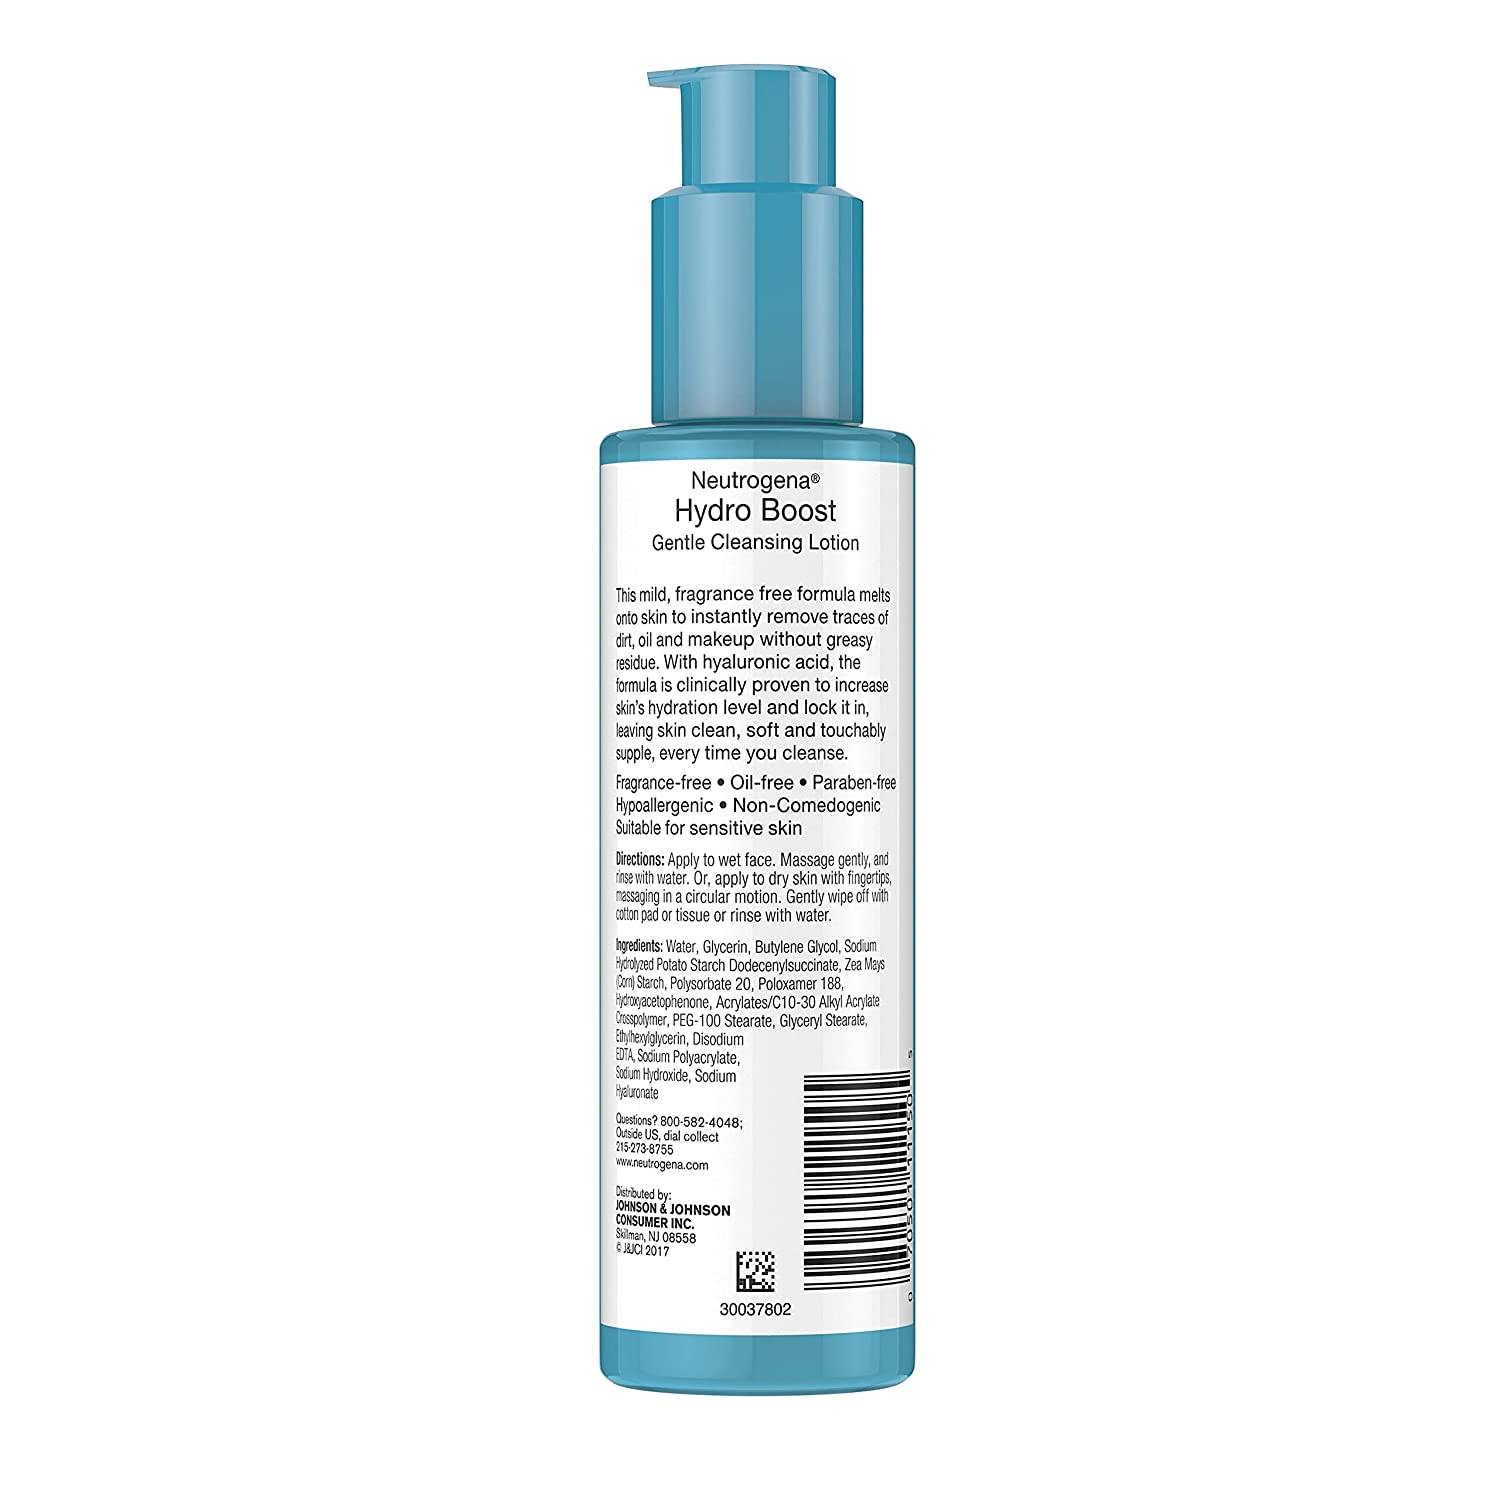 Neutrogena Hydro Boost Gentle Cleansing Lotion 5 oz (Pack of 2) - image 5 of 6